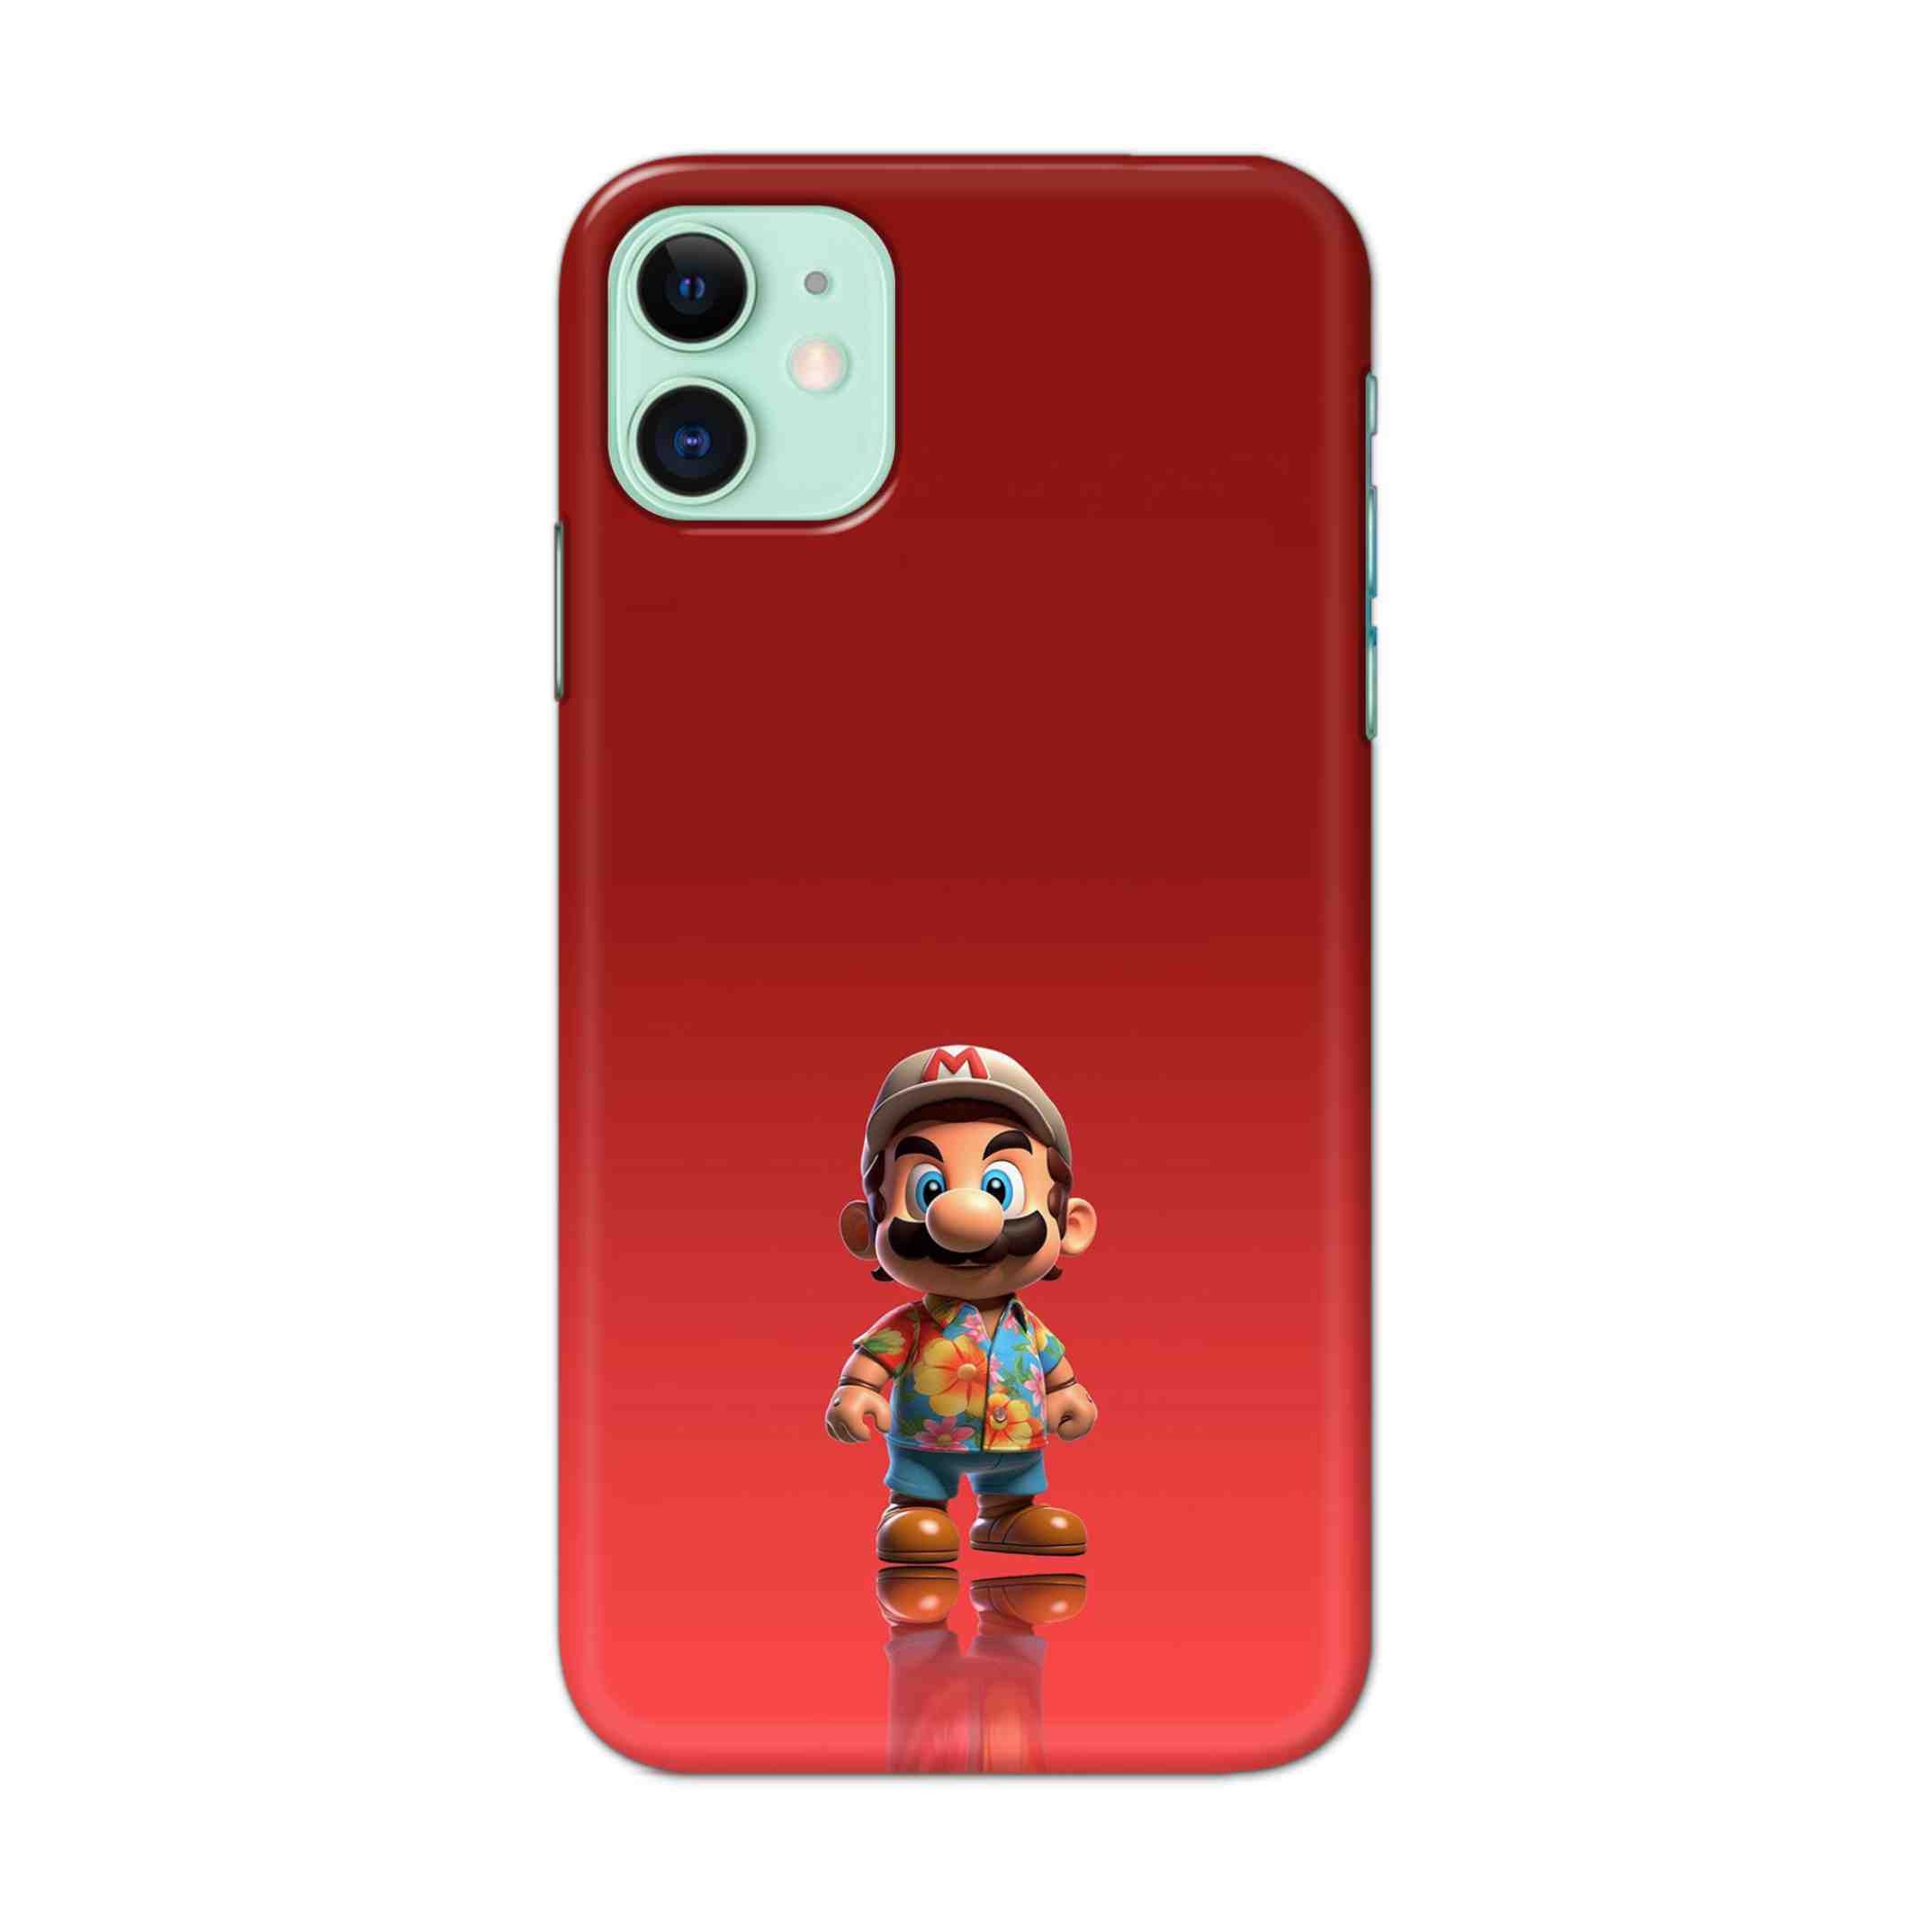 Buy Mario Hard Back Mobile Phone Case/Cover For iPhone 11 Online